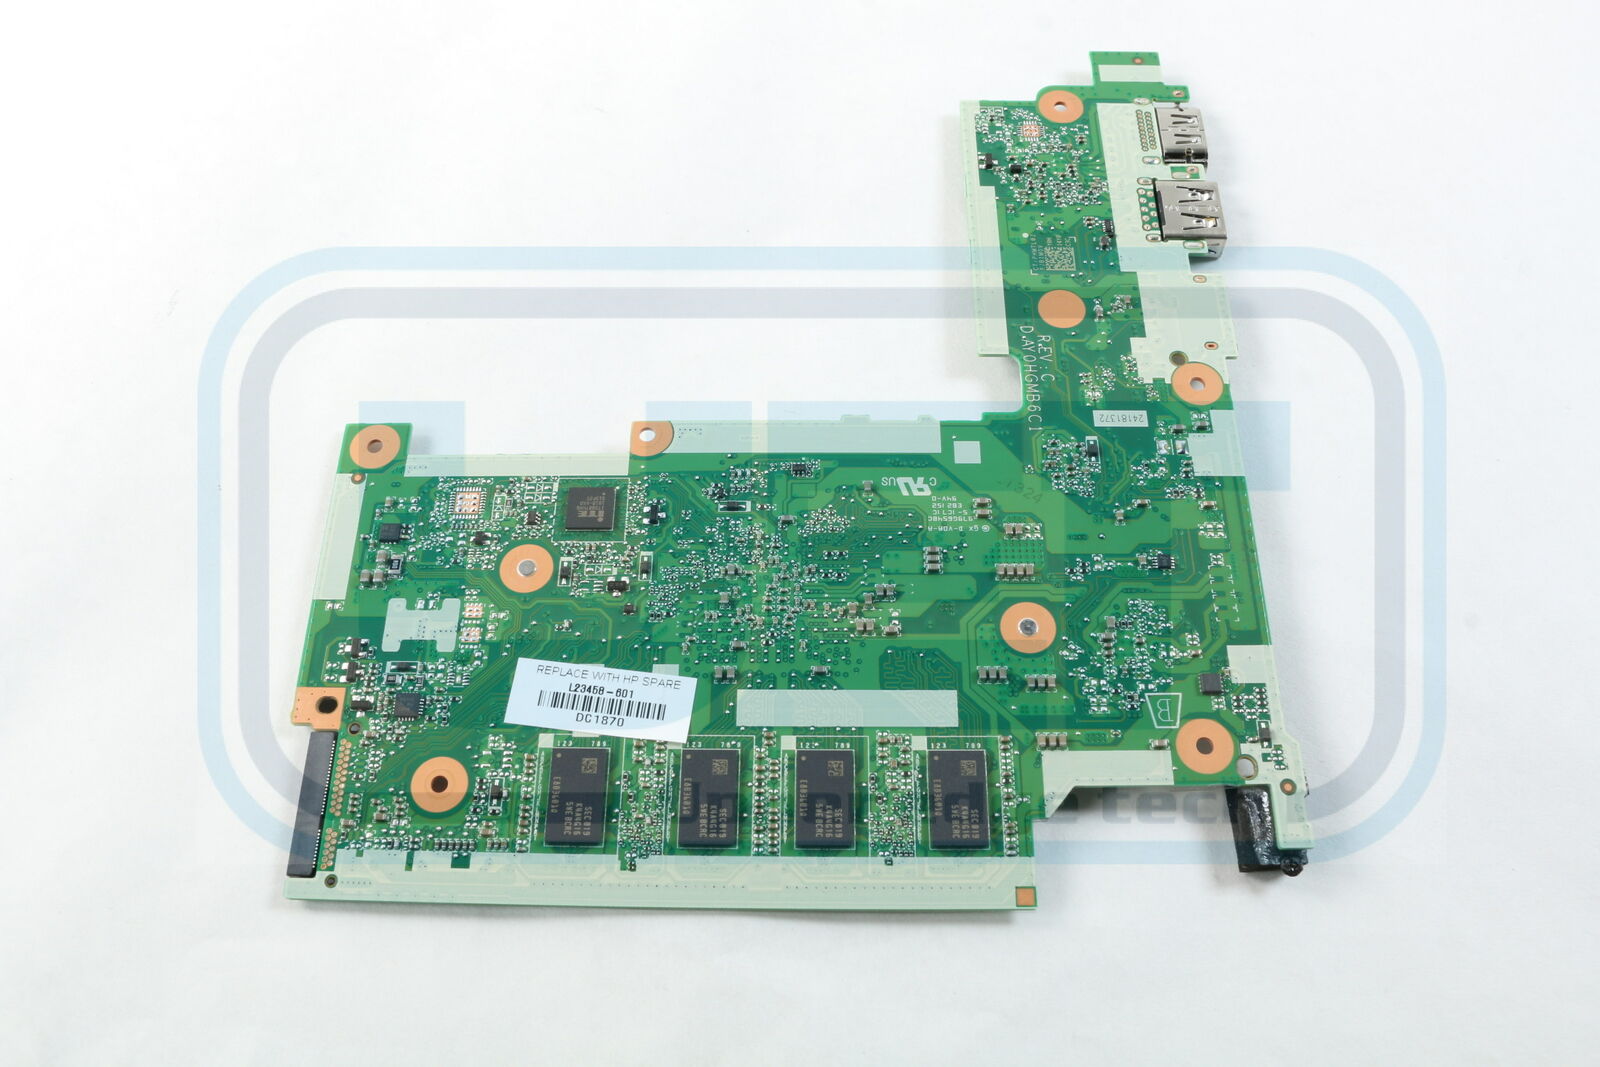 Item Condition HP OEM Original Part Part taken from a good, working HP Laptop Tested and Verified working Pro